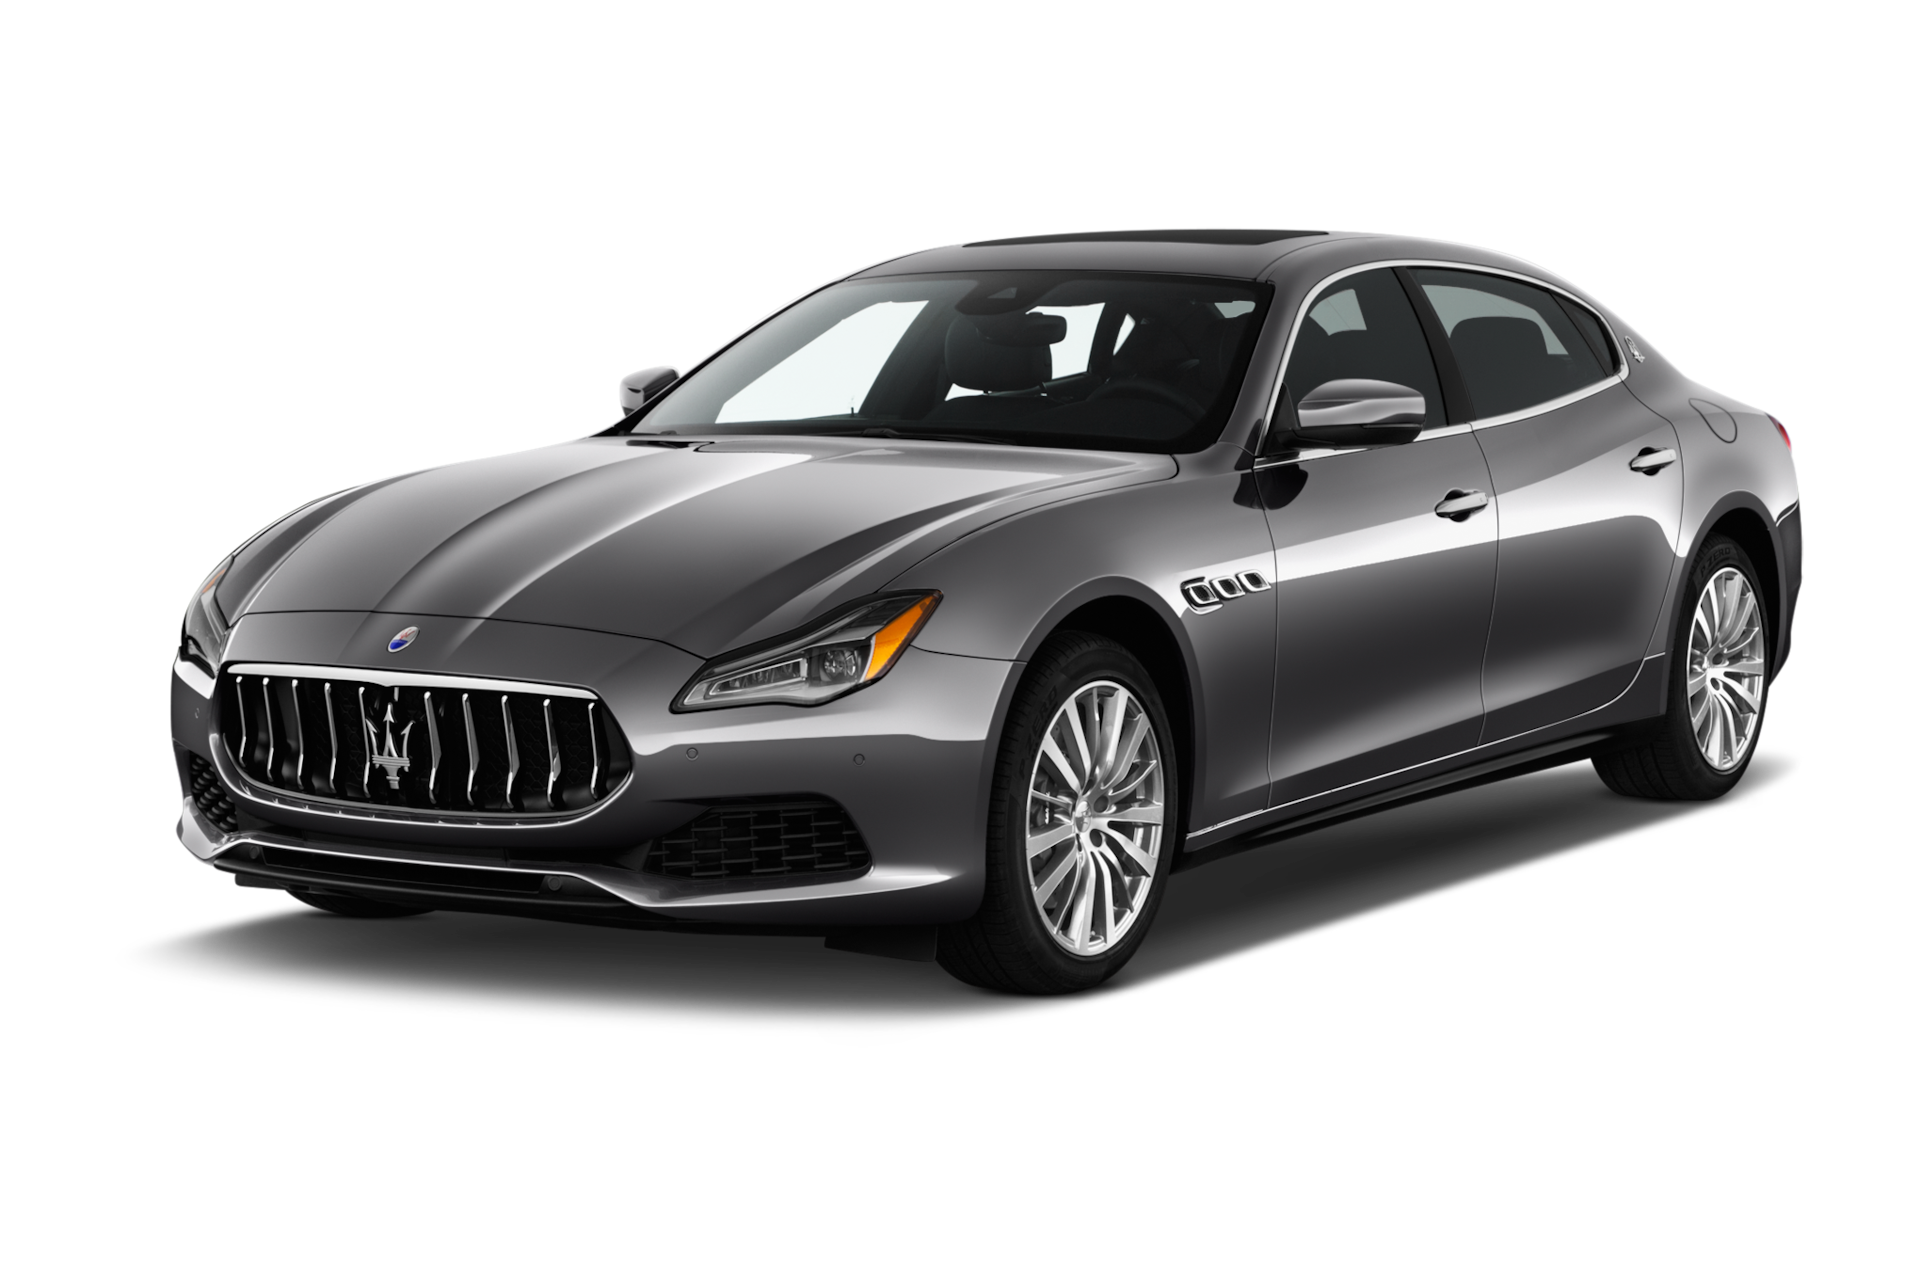 2018 Maserati Quattroporte Prices, Reviews, and Photos - MotorTrend